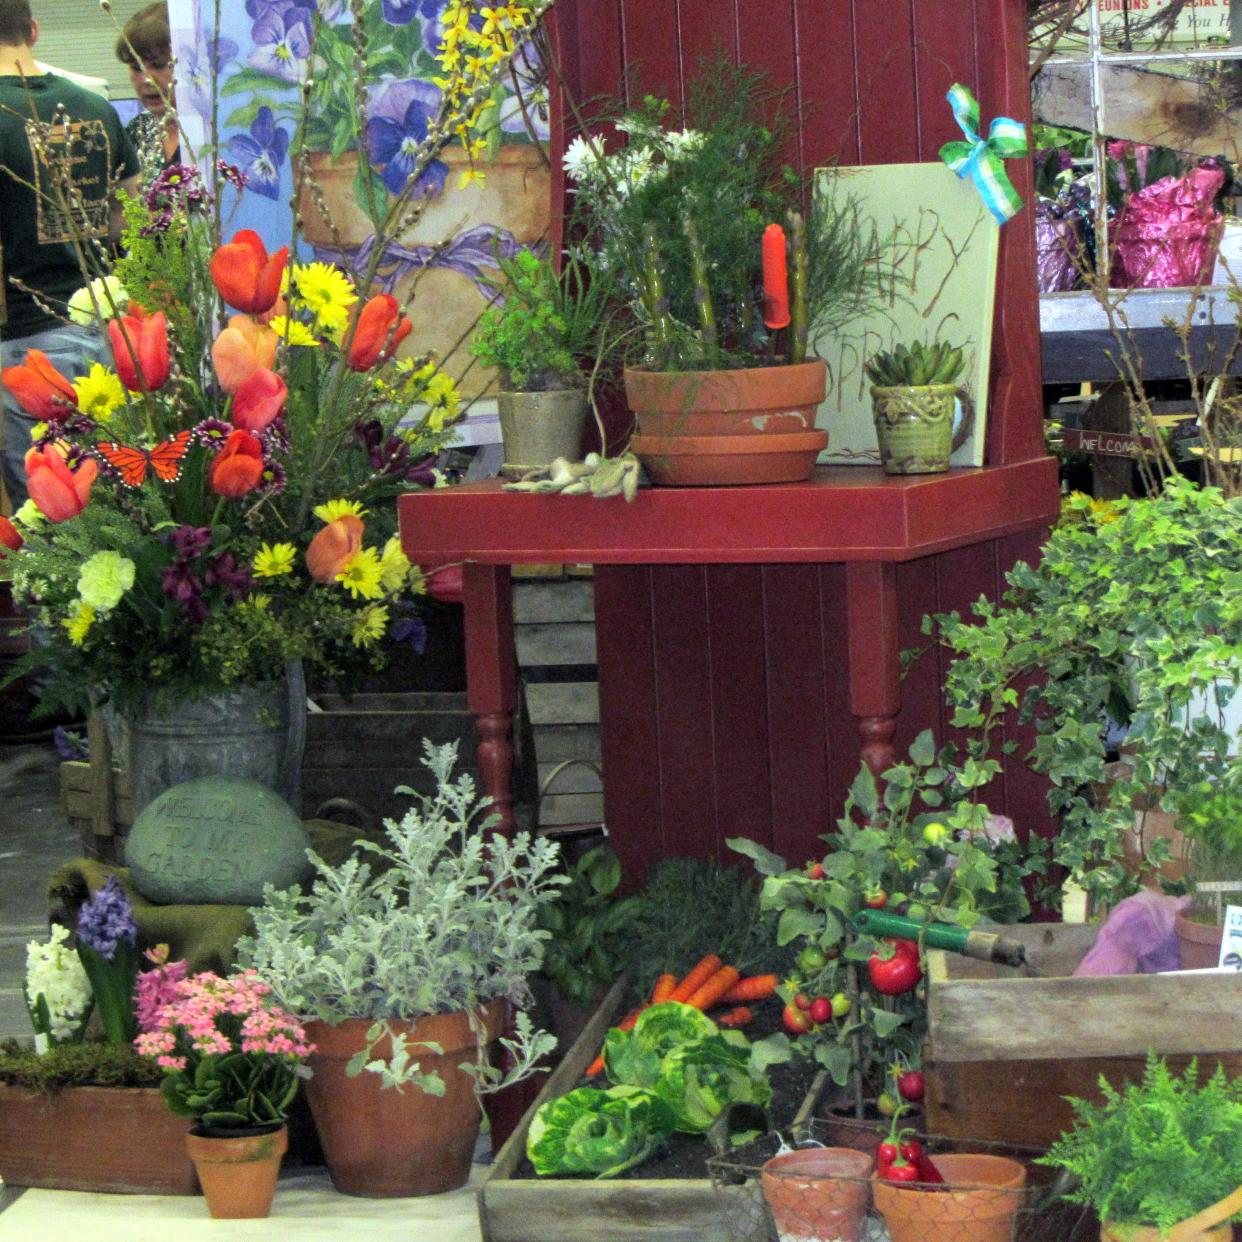 The 28th Annual Flower & Garden Show will be held Saturday, March 16, from 9 a.m. to 5 p.m., and Sunday, March 17, from 10 a.m. to 4 p.m. in the Athletic, Recreation and Community Center at Hagerstown Community College, 11400 Robinwood Drive, Hagerstown.